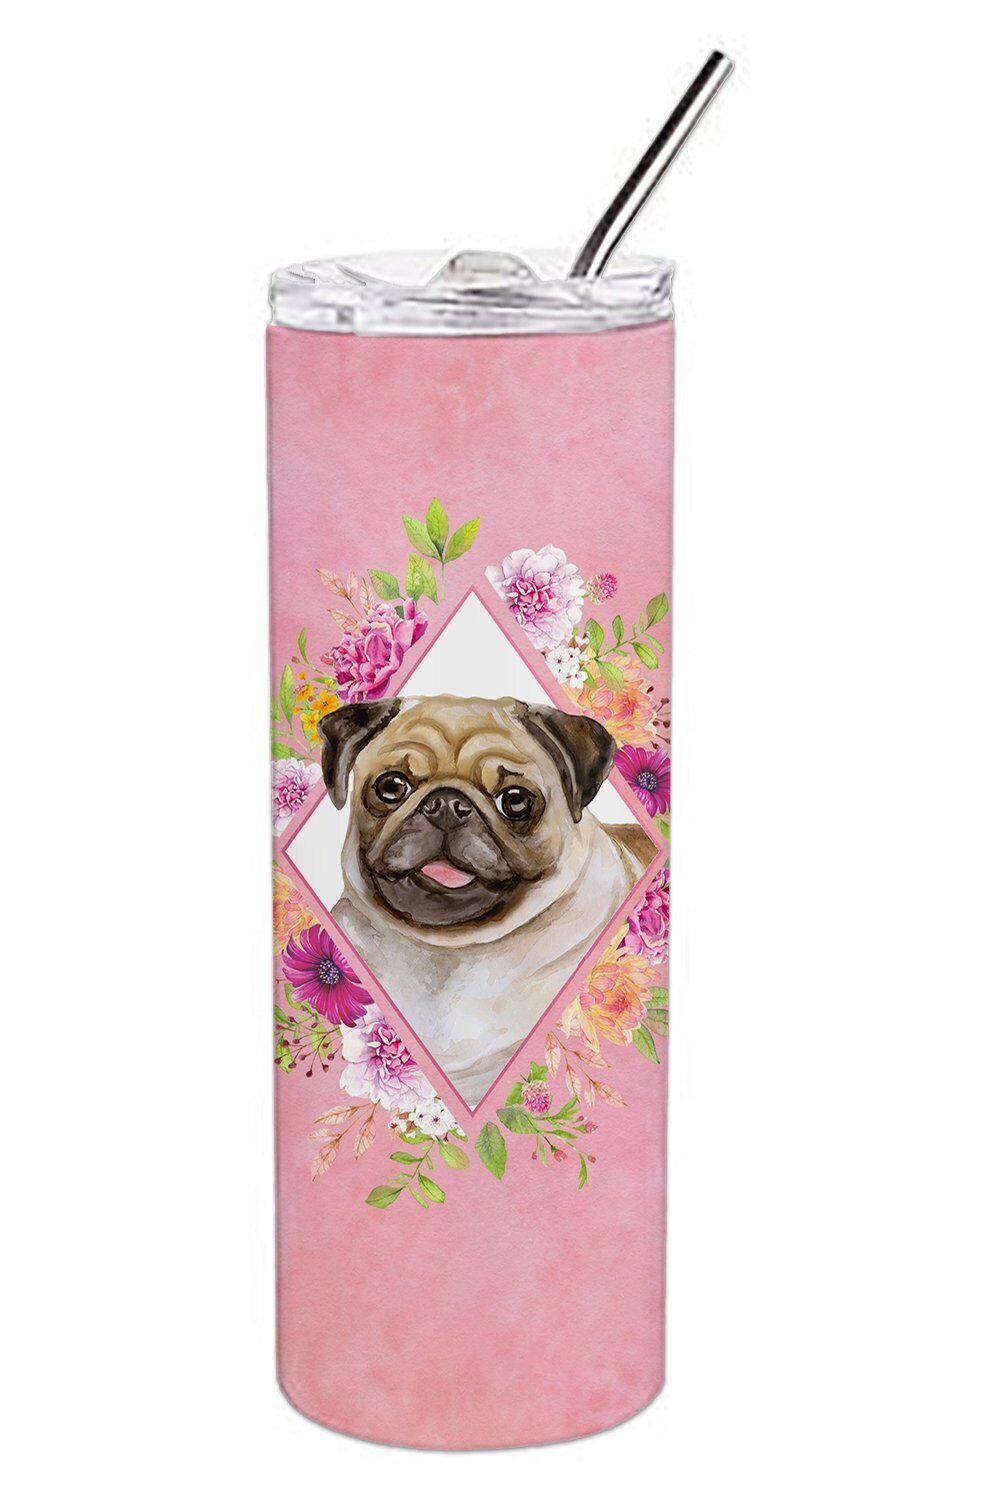 Fawn Pug Pink Flowers Stainless Steel 20 oz Skinny Tumbler CK4174TBL20   New